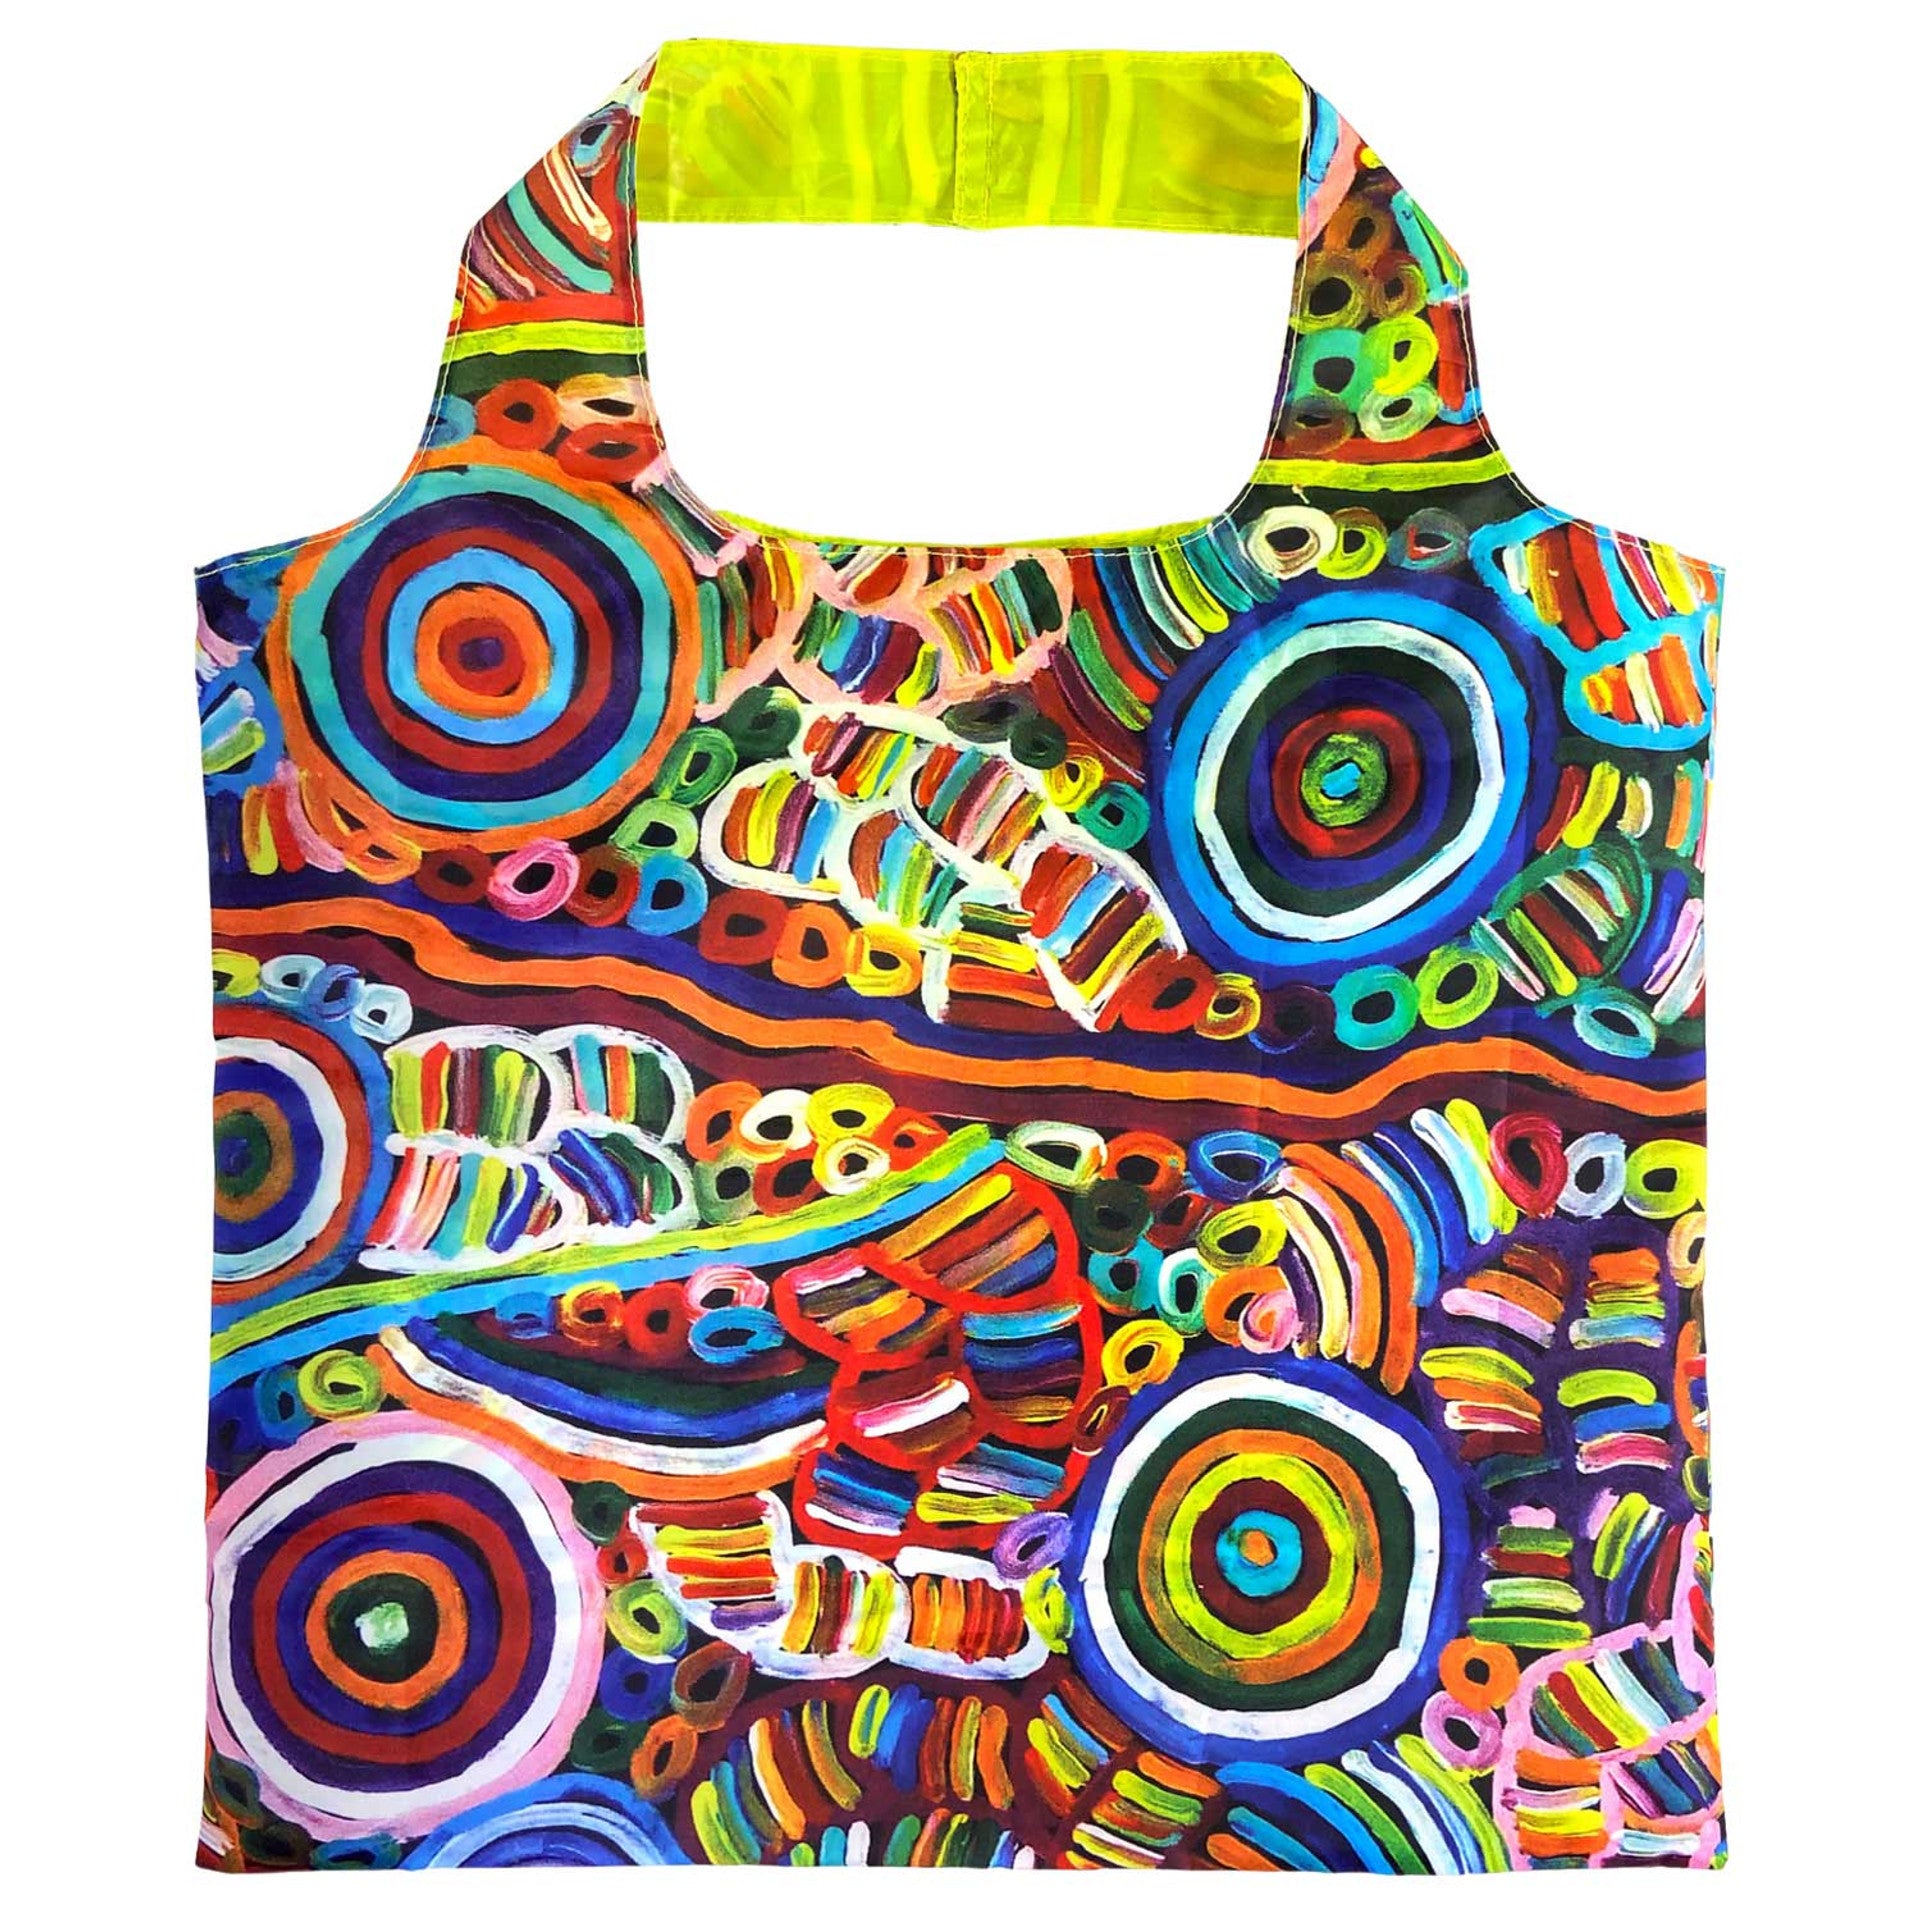 Foldable Shopping Bag (Recycled) - Betty Mpetyane - Multi